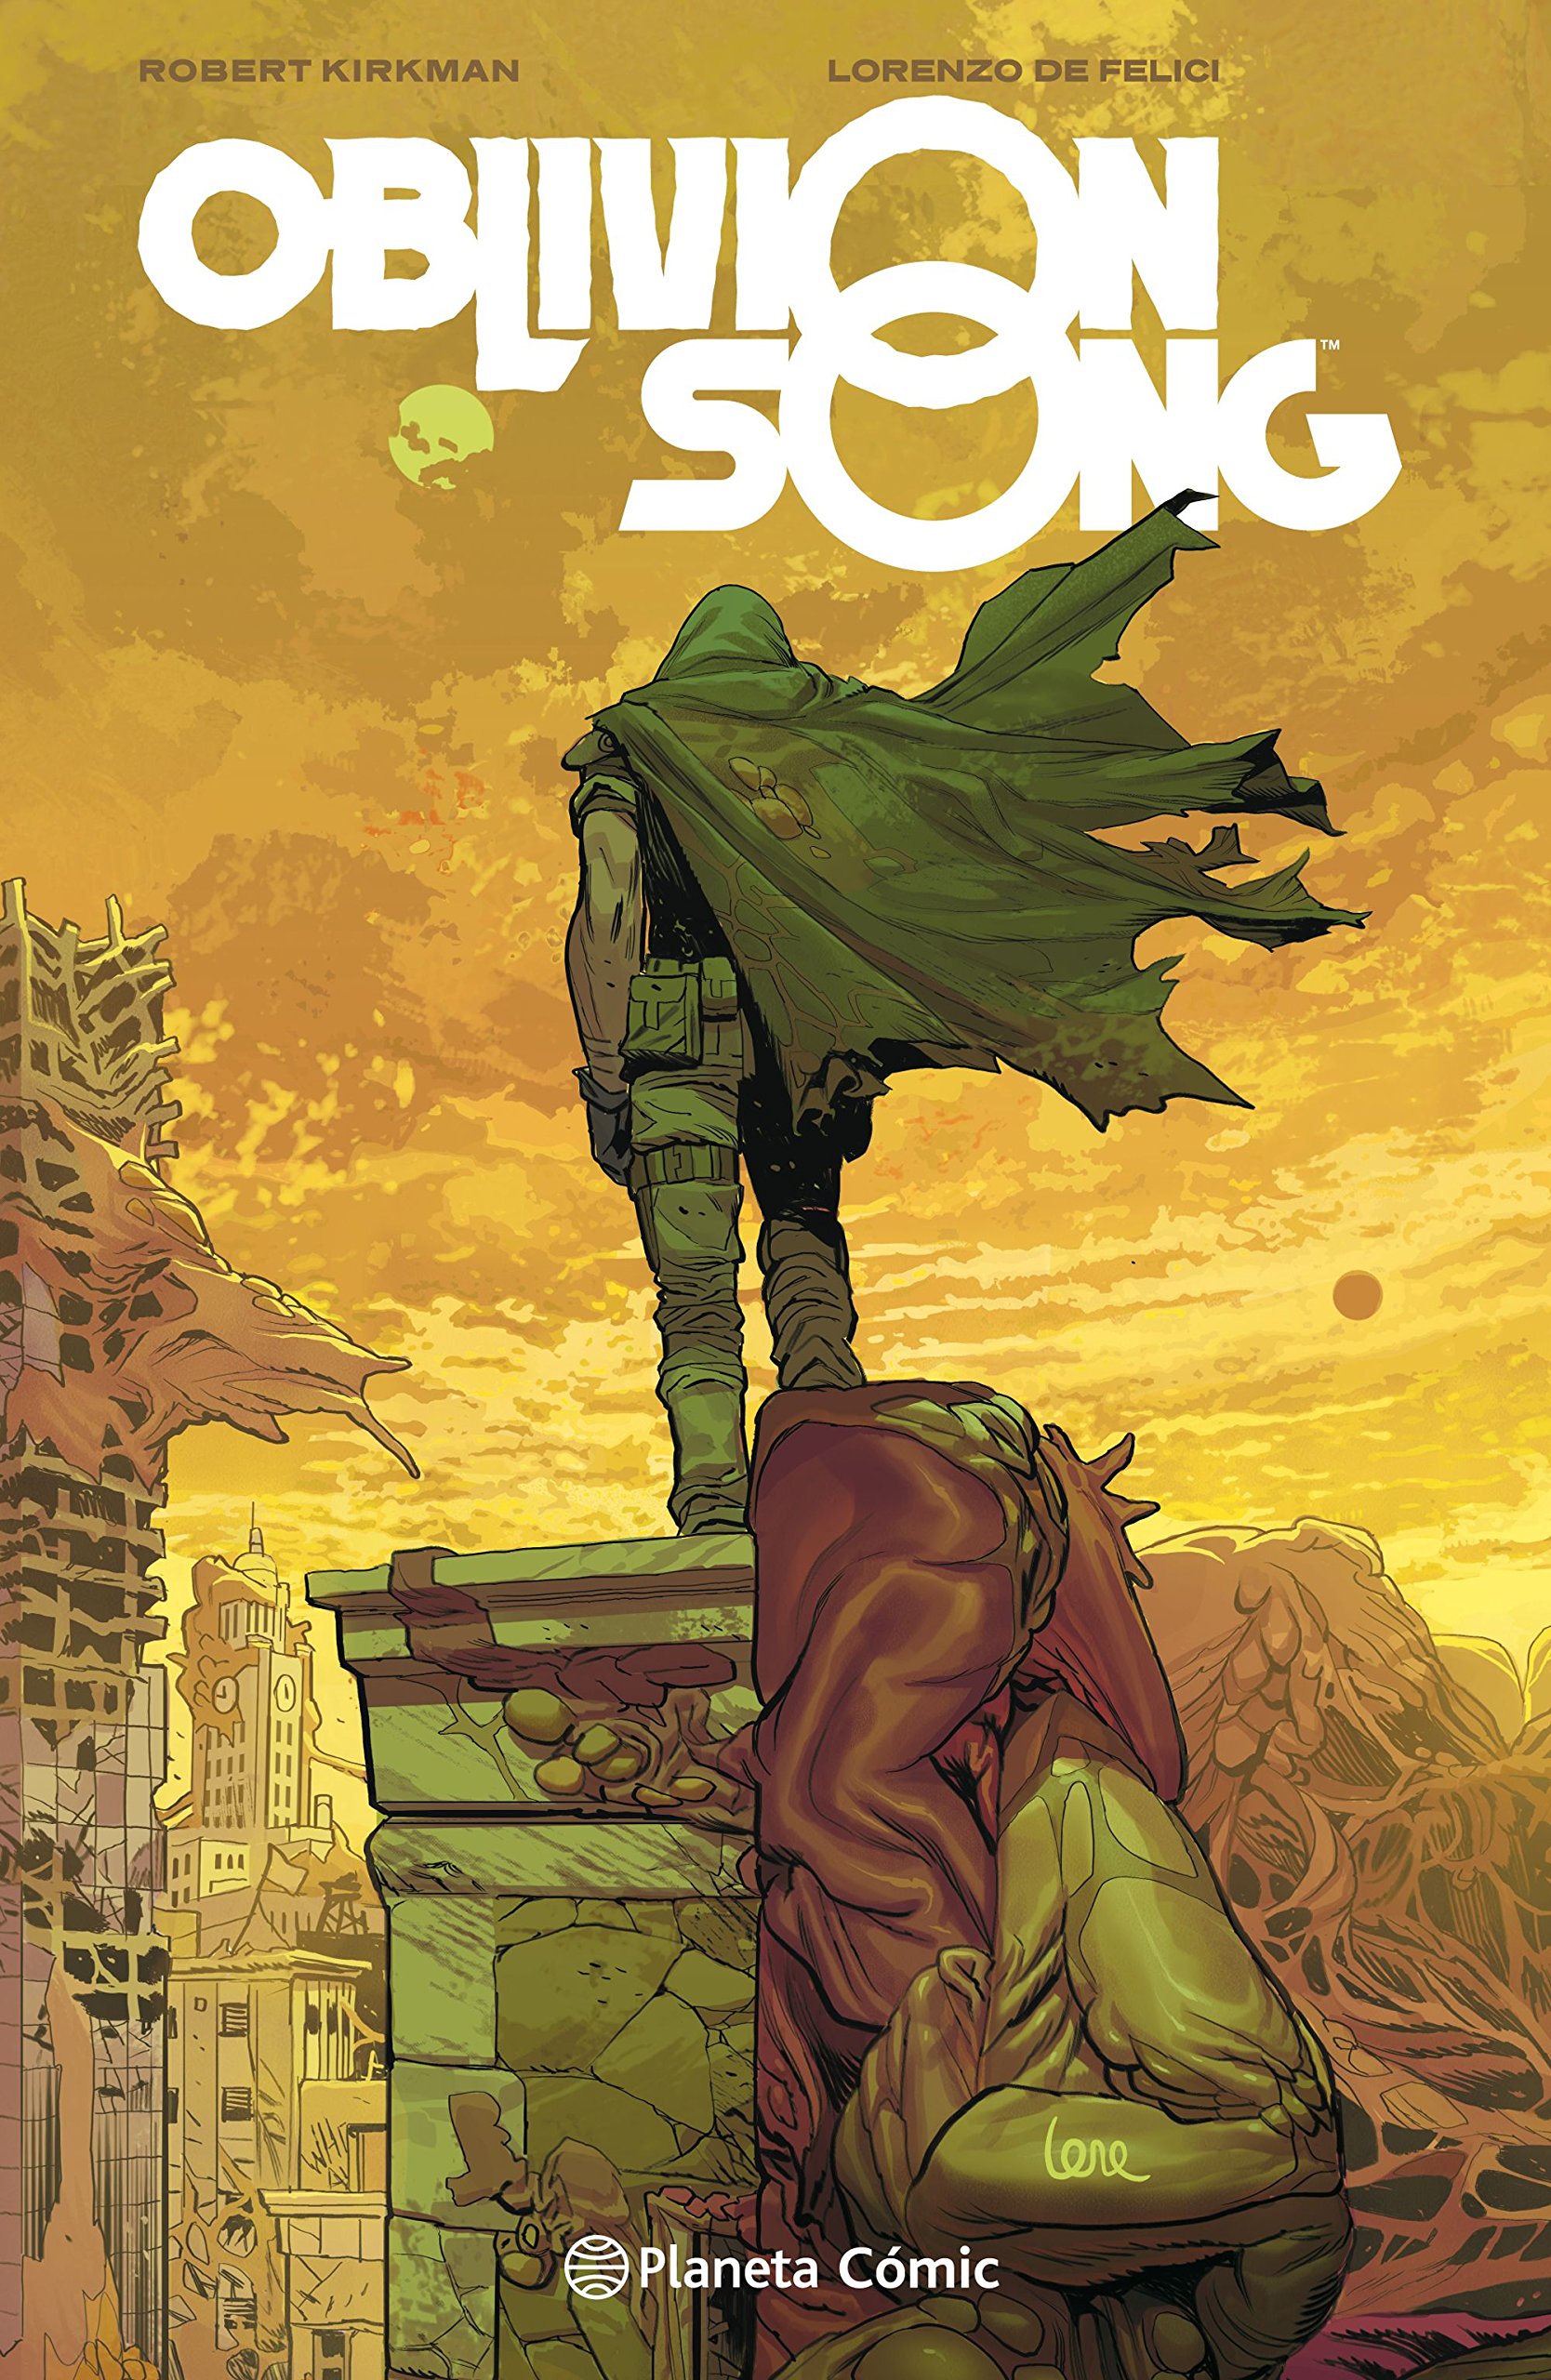 Cover from Oblivion song